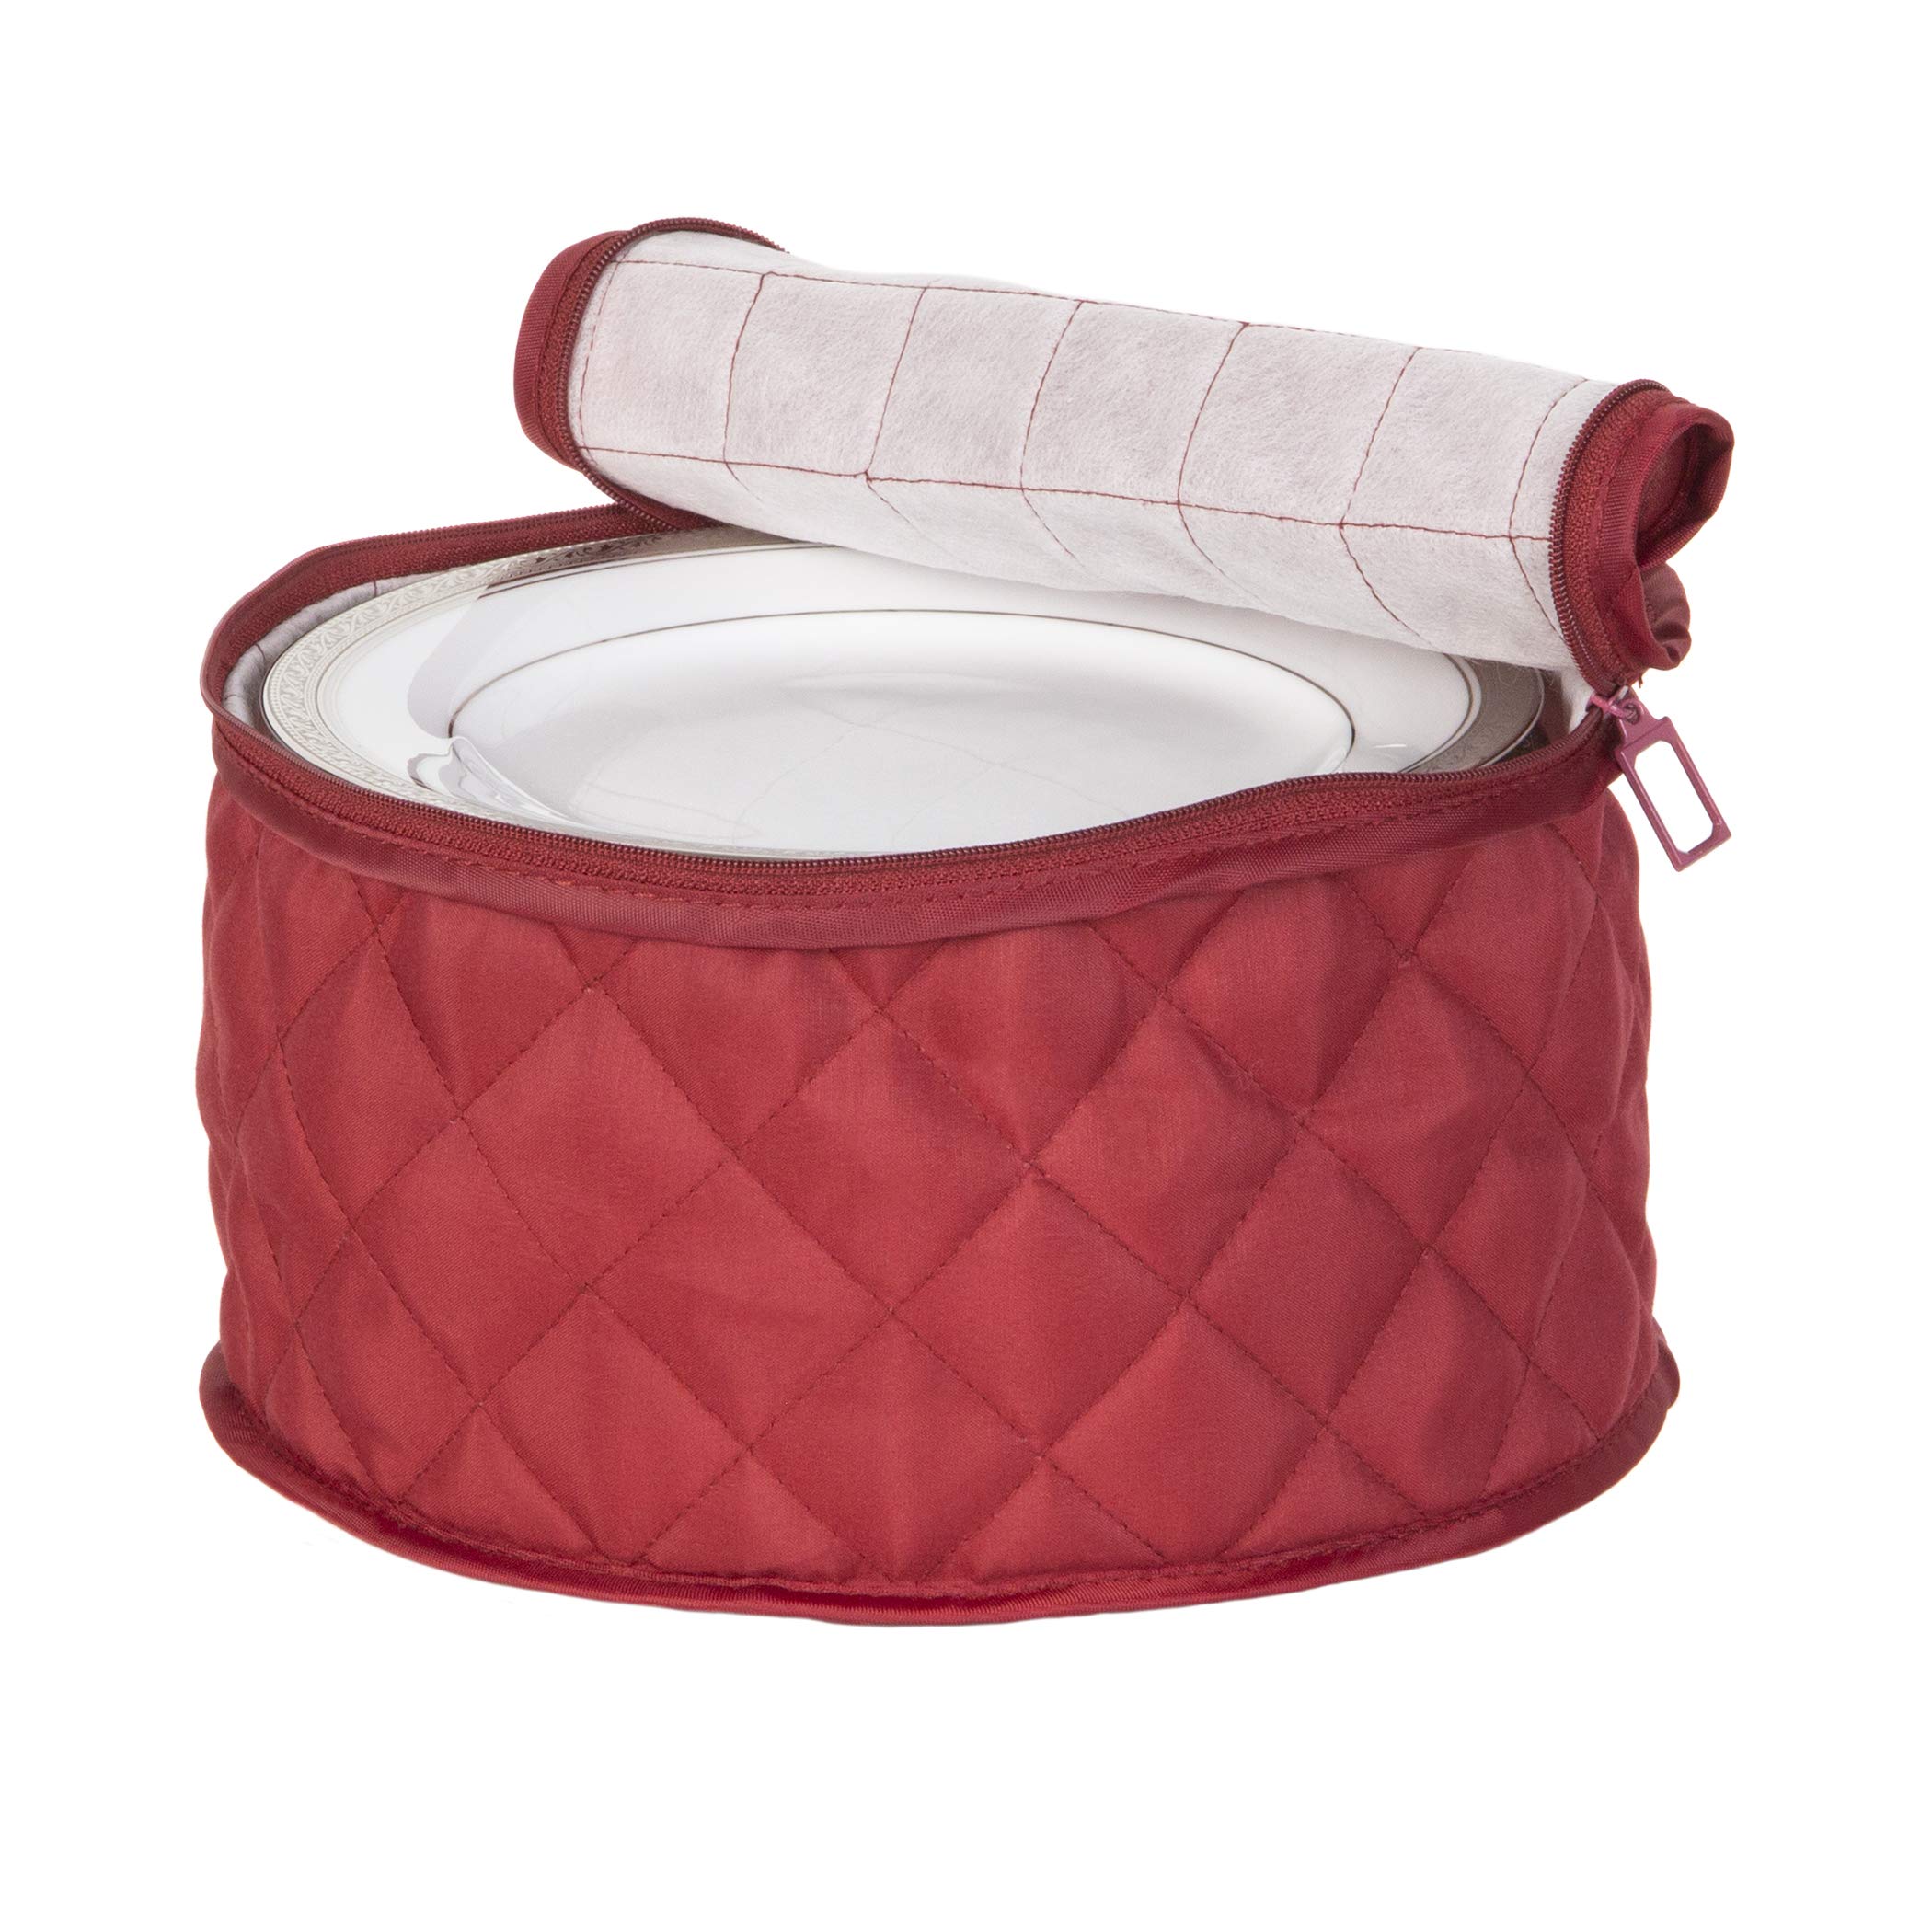 Richard's Homewares - Quilted China Keepers 6pc. Starter Set - Crimson